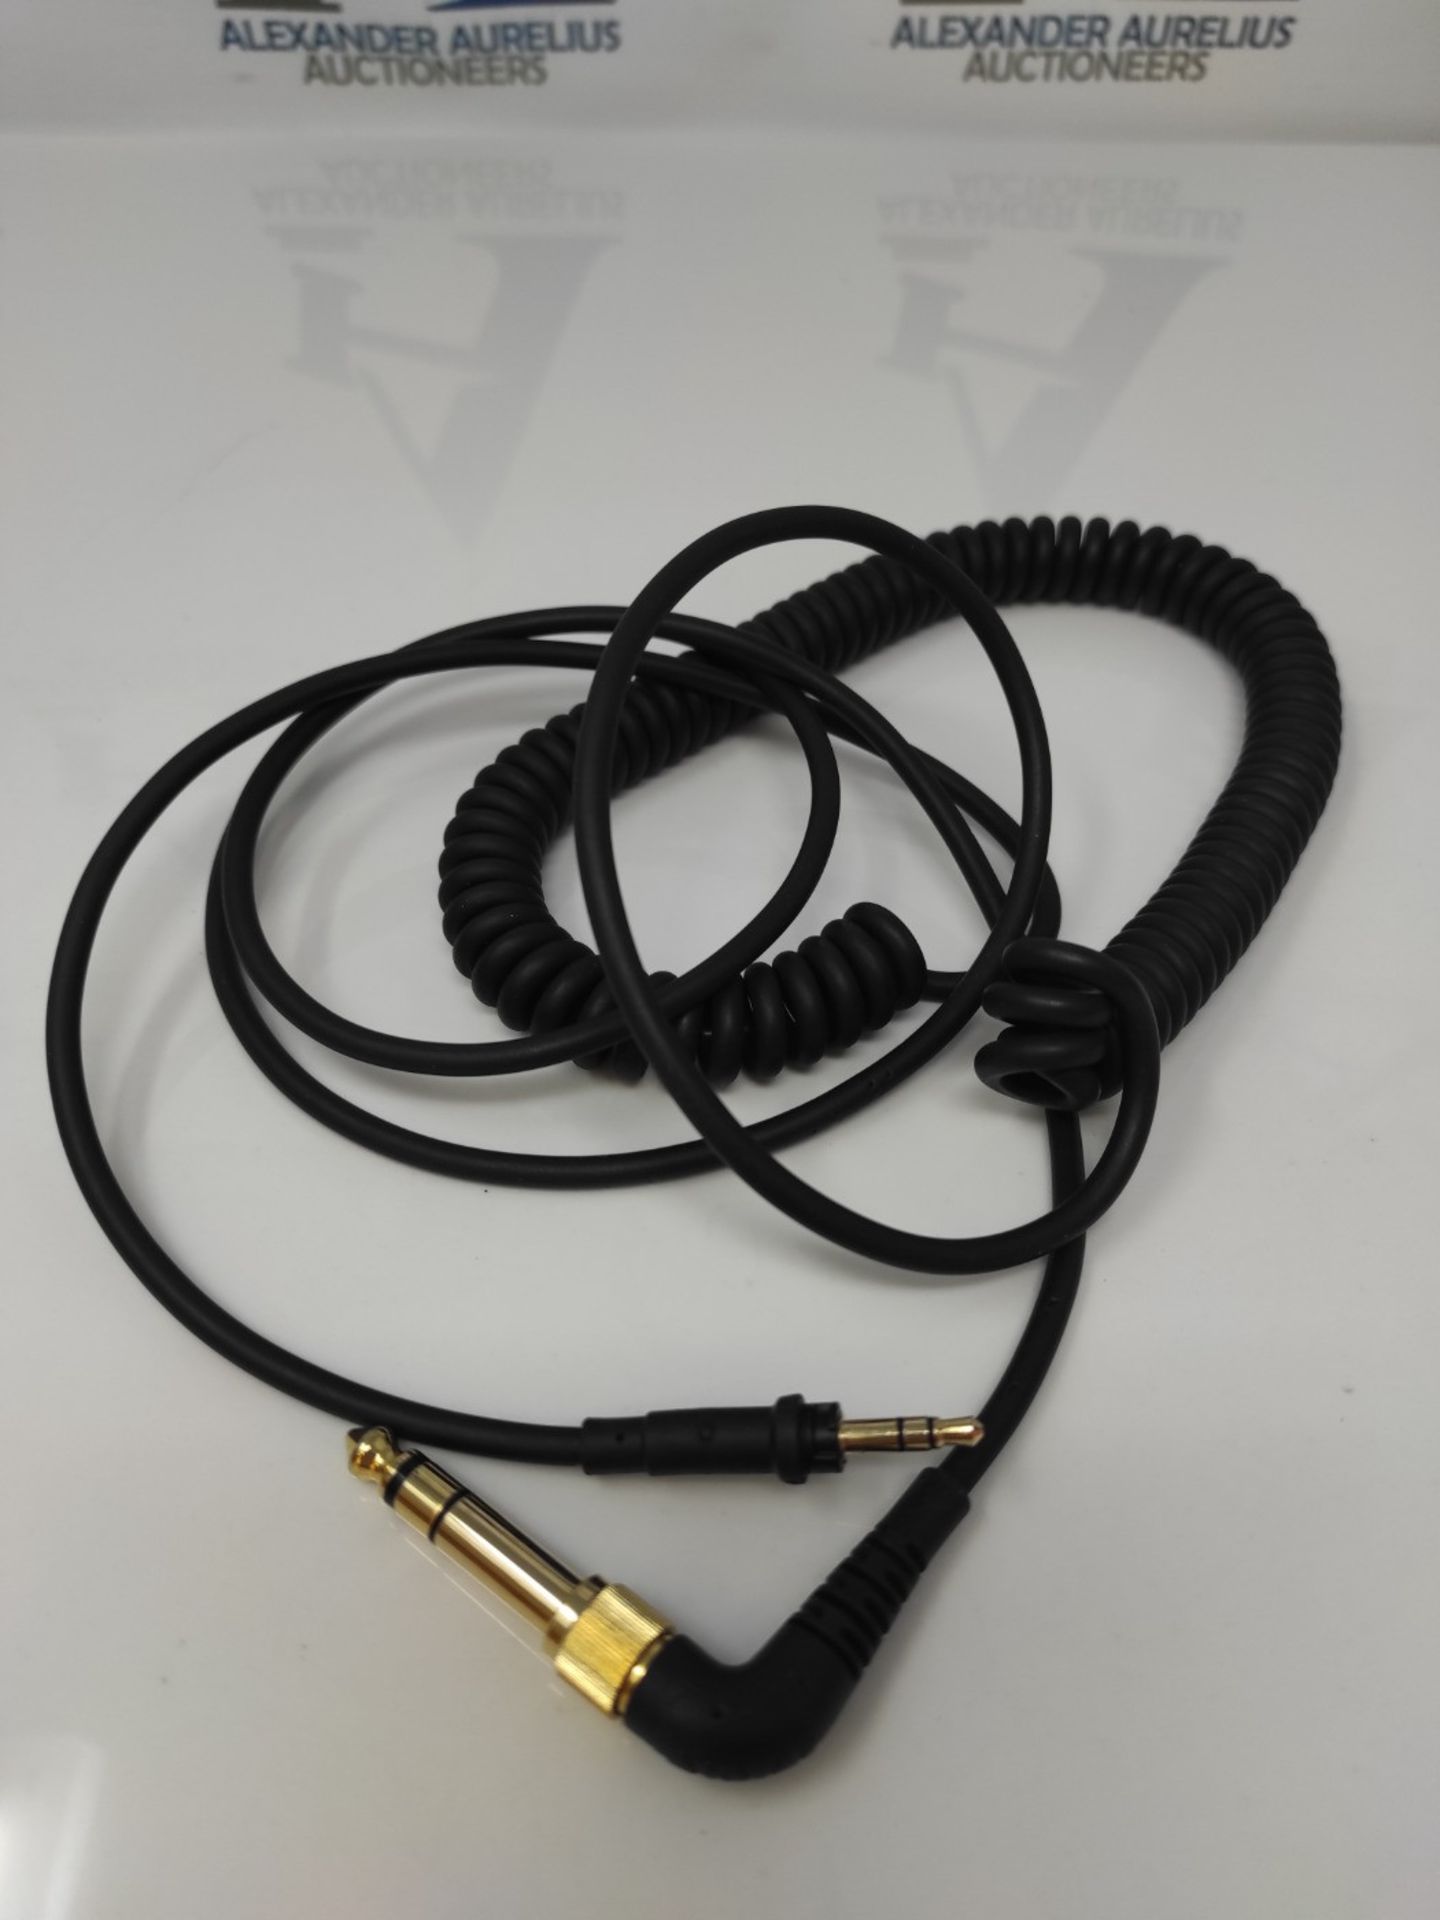 AIAIAI TMA-2 Professional Headphones - CO2 Cable - Coiled Cable 1.5m Thermo Plastic Ca - Image 2 of 2